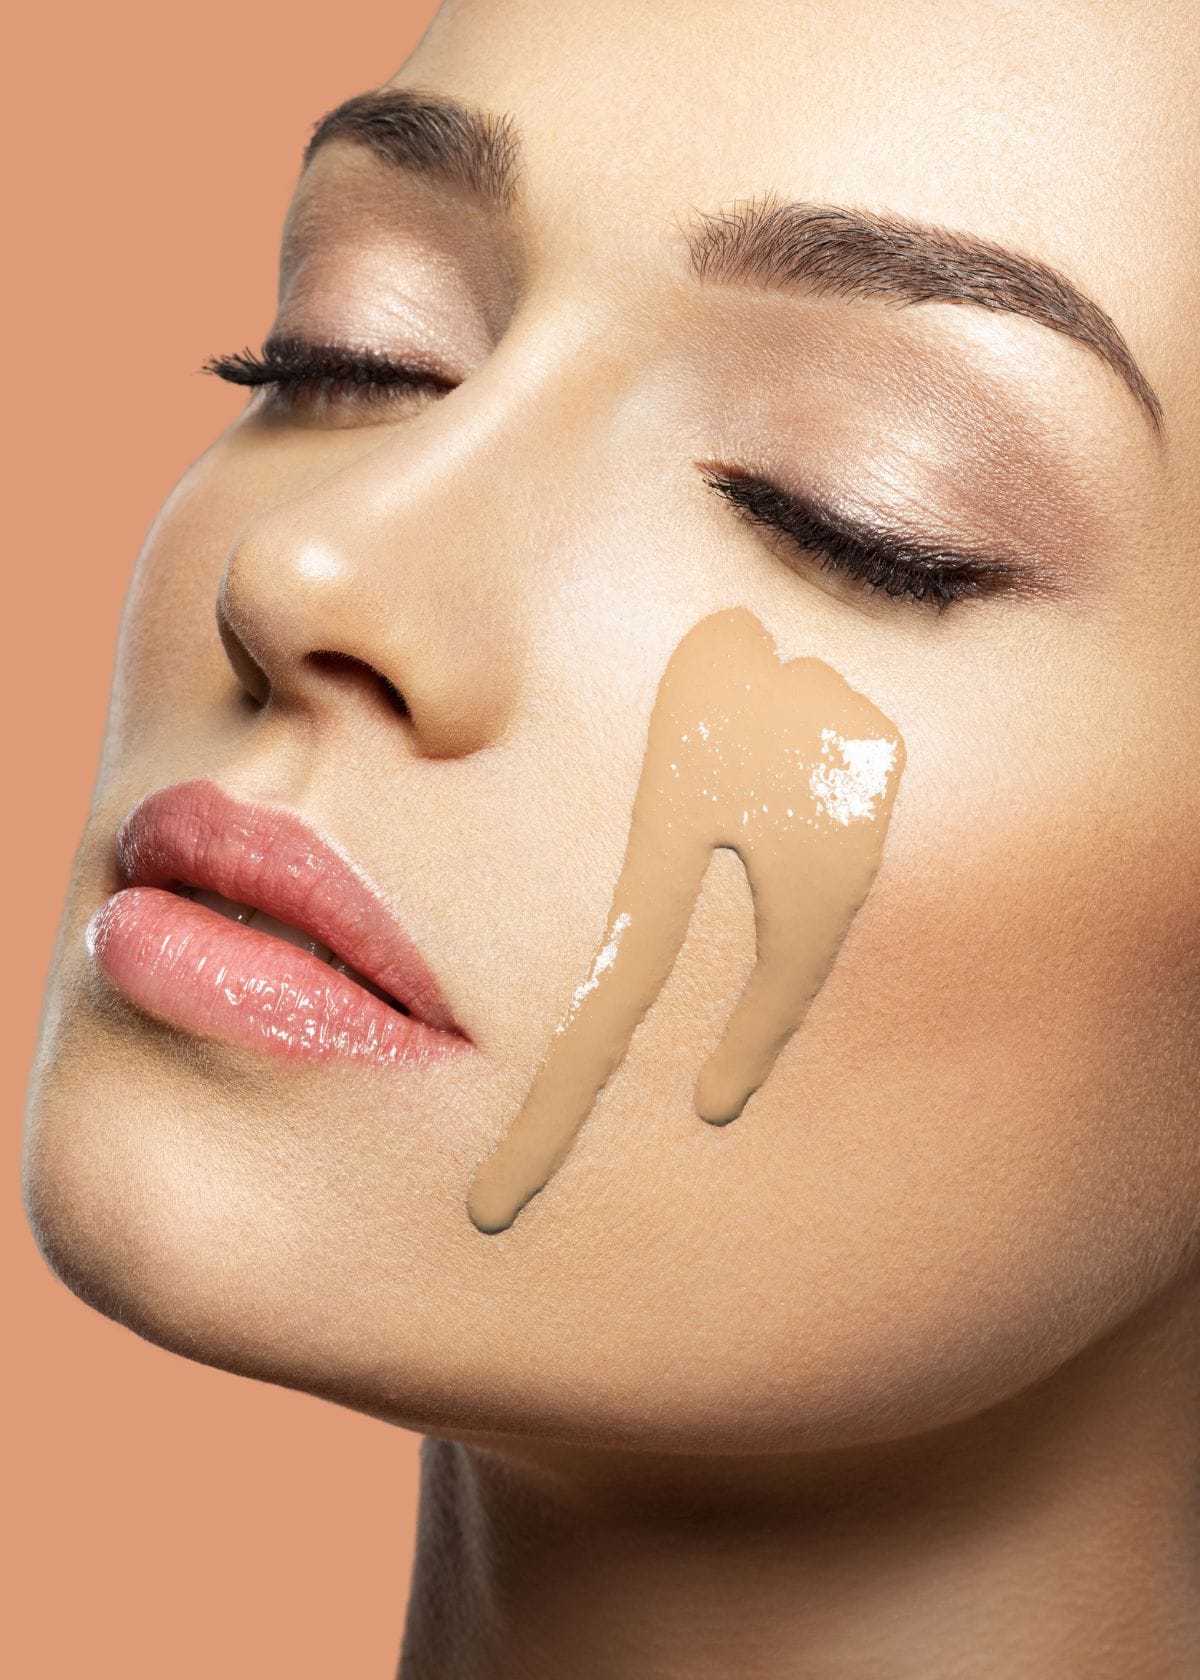 How to Apply Water Based Foundation?